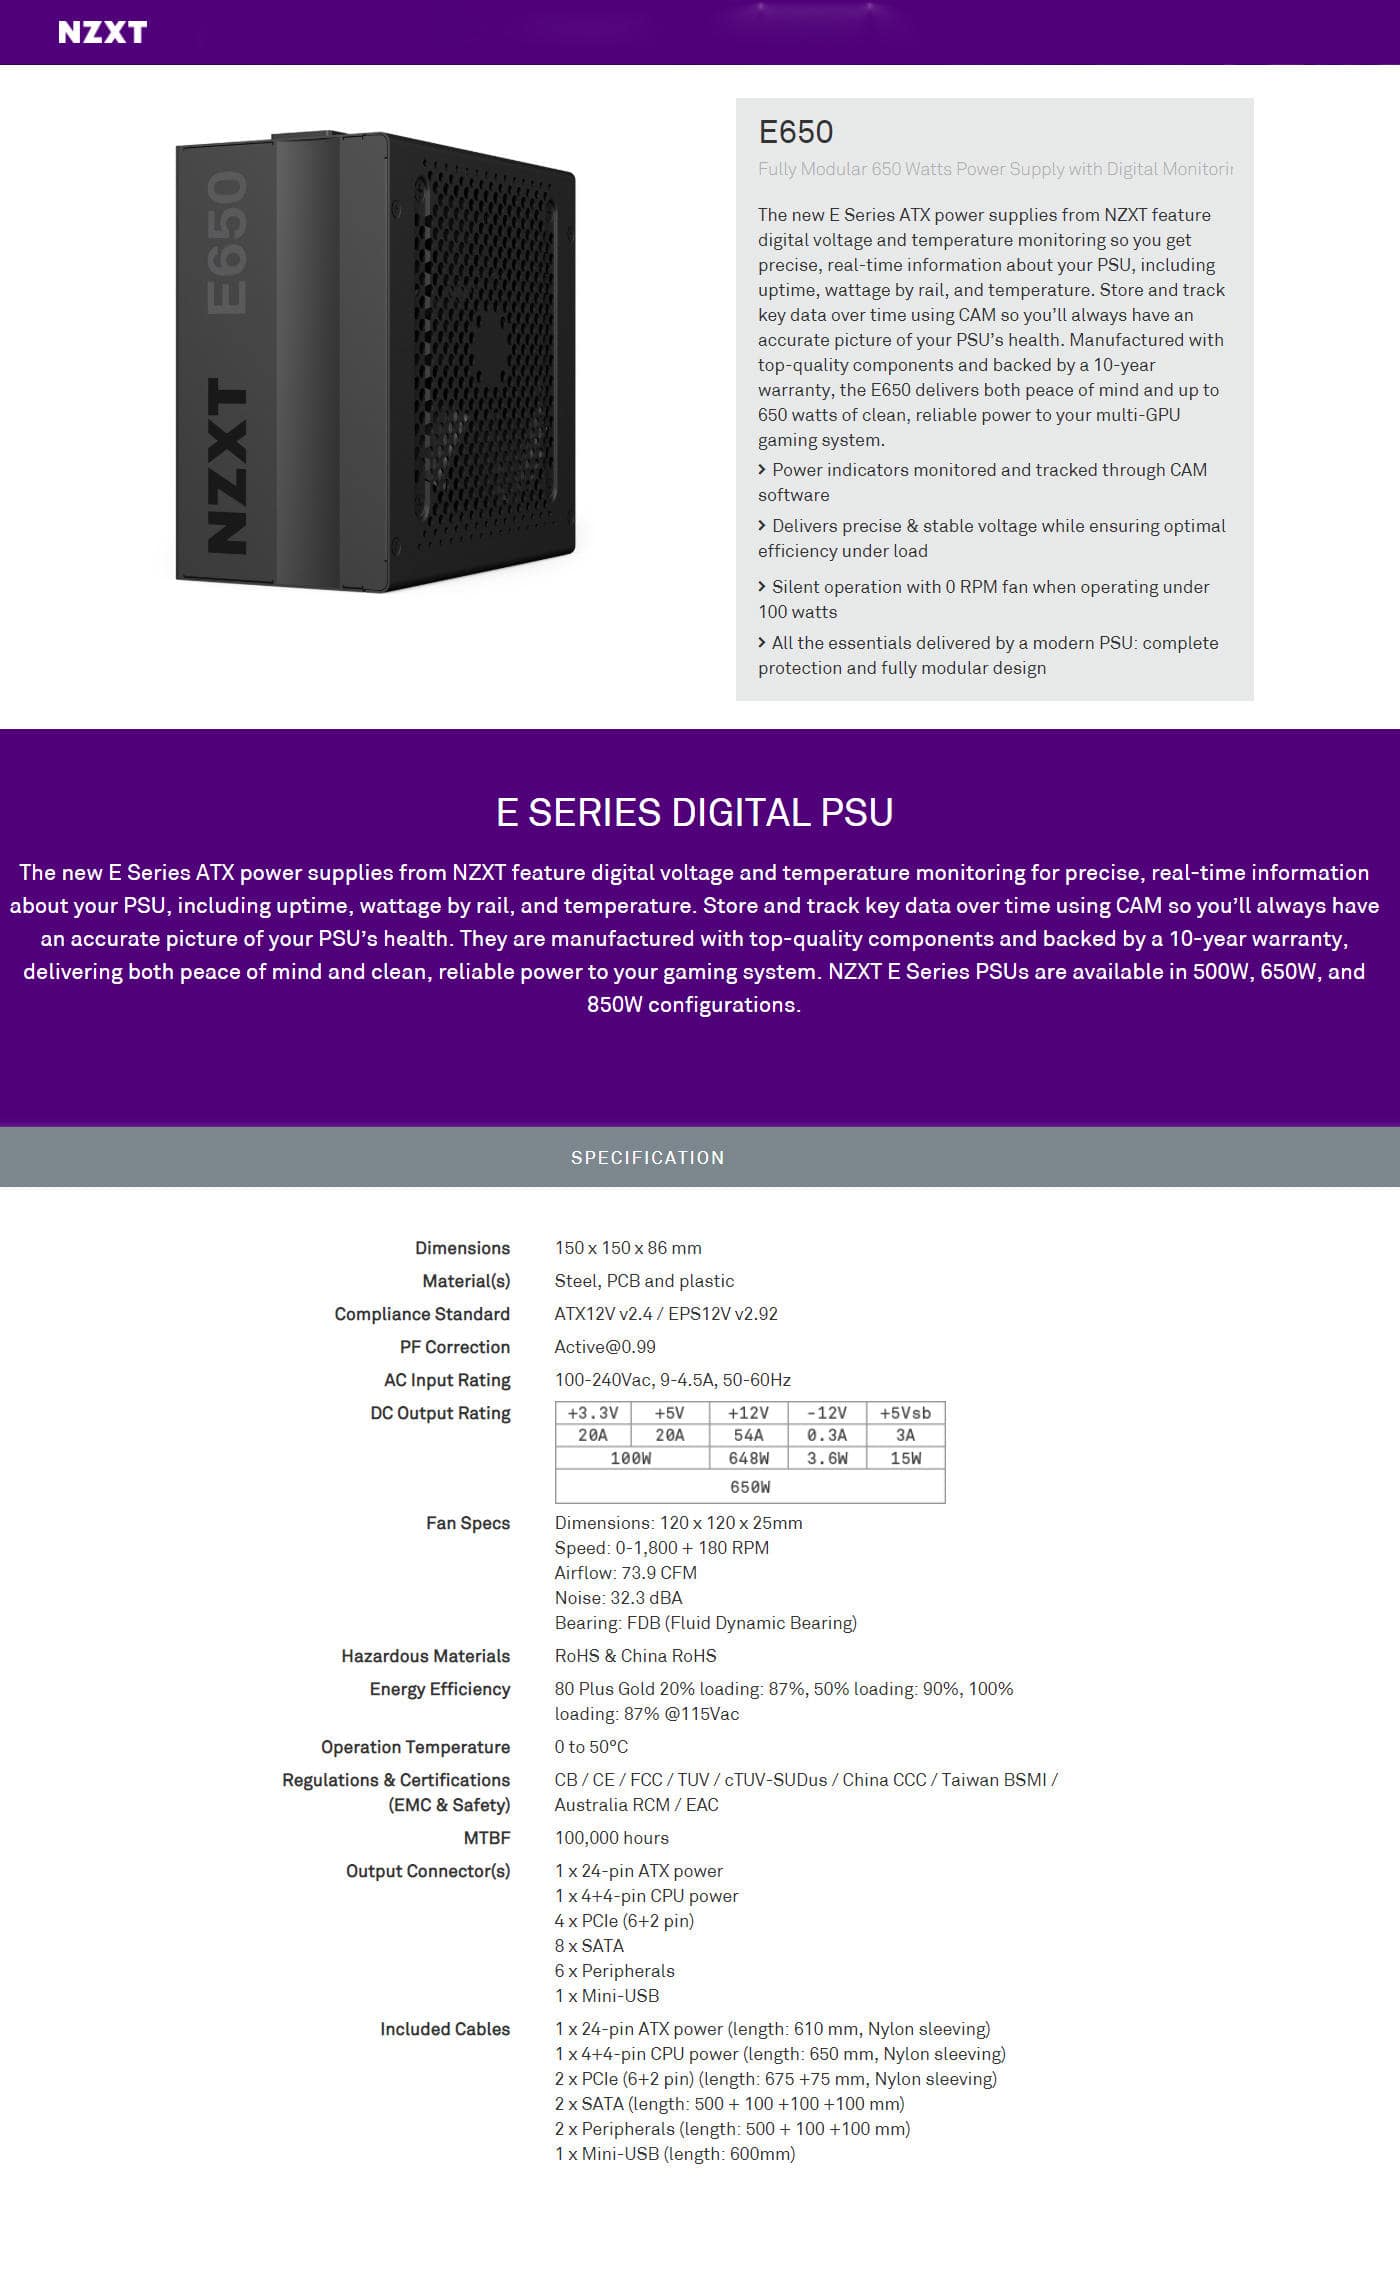 Buy Online Nzxt E650 Fully Modular 650 Watts Power Supply with Digital Monitoring Features (NP-1PM-E650A)